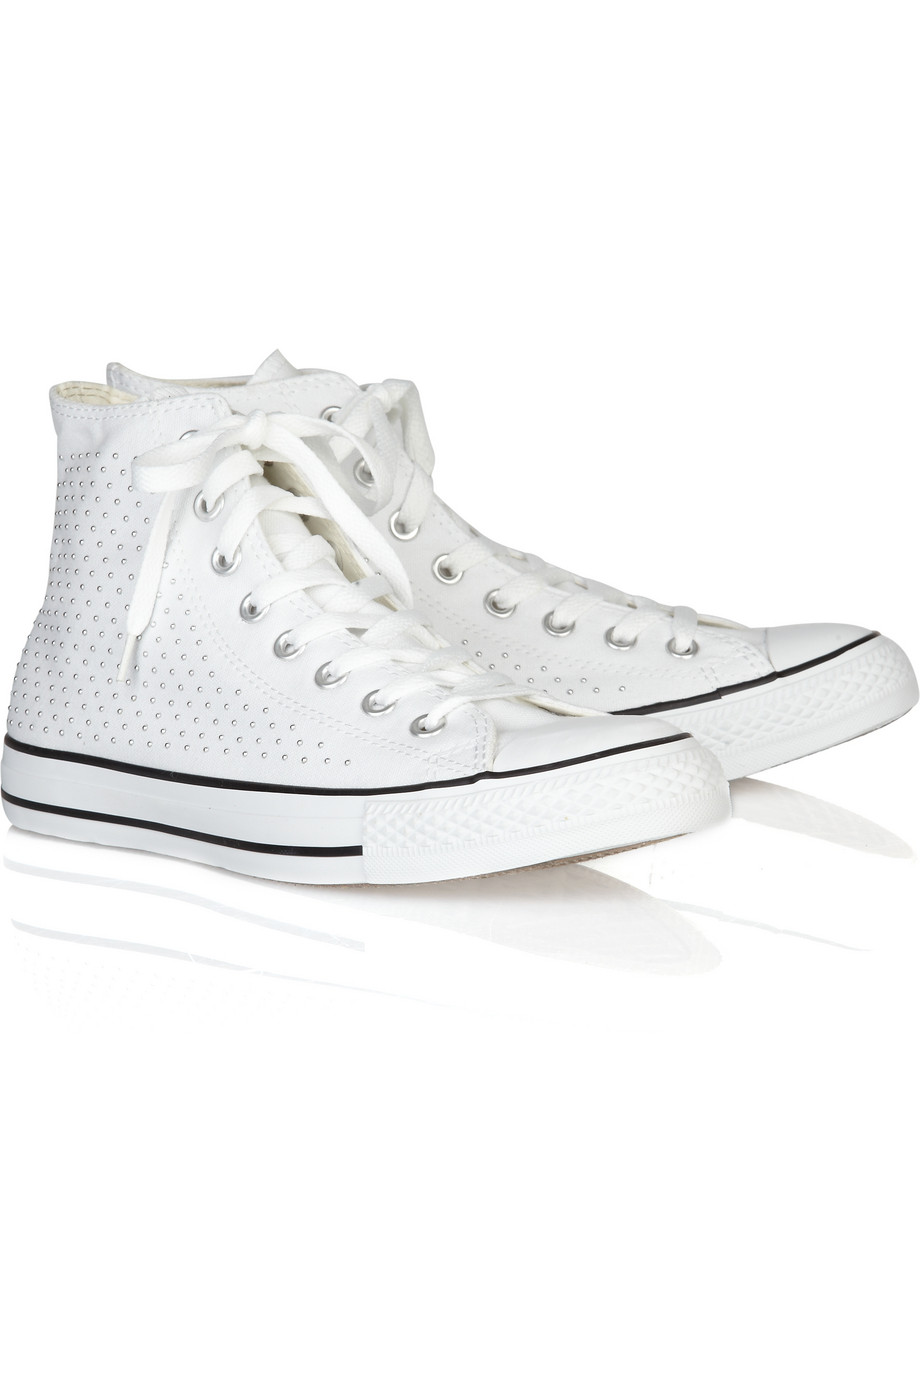 Converse Studded Canvas Sneakers in White - Lyst